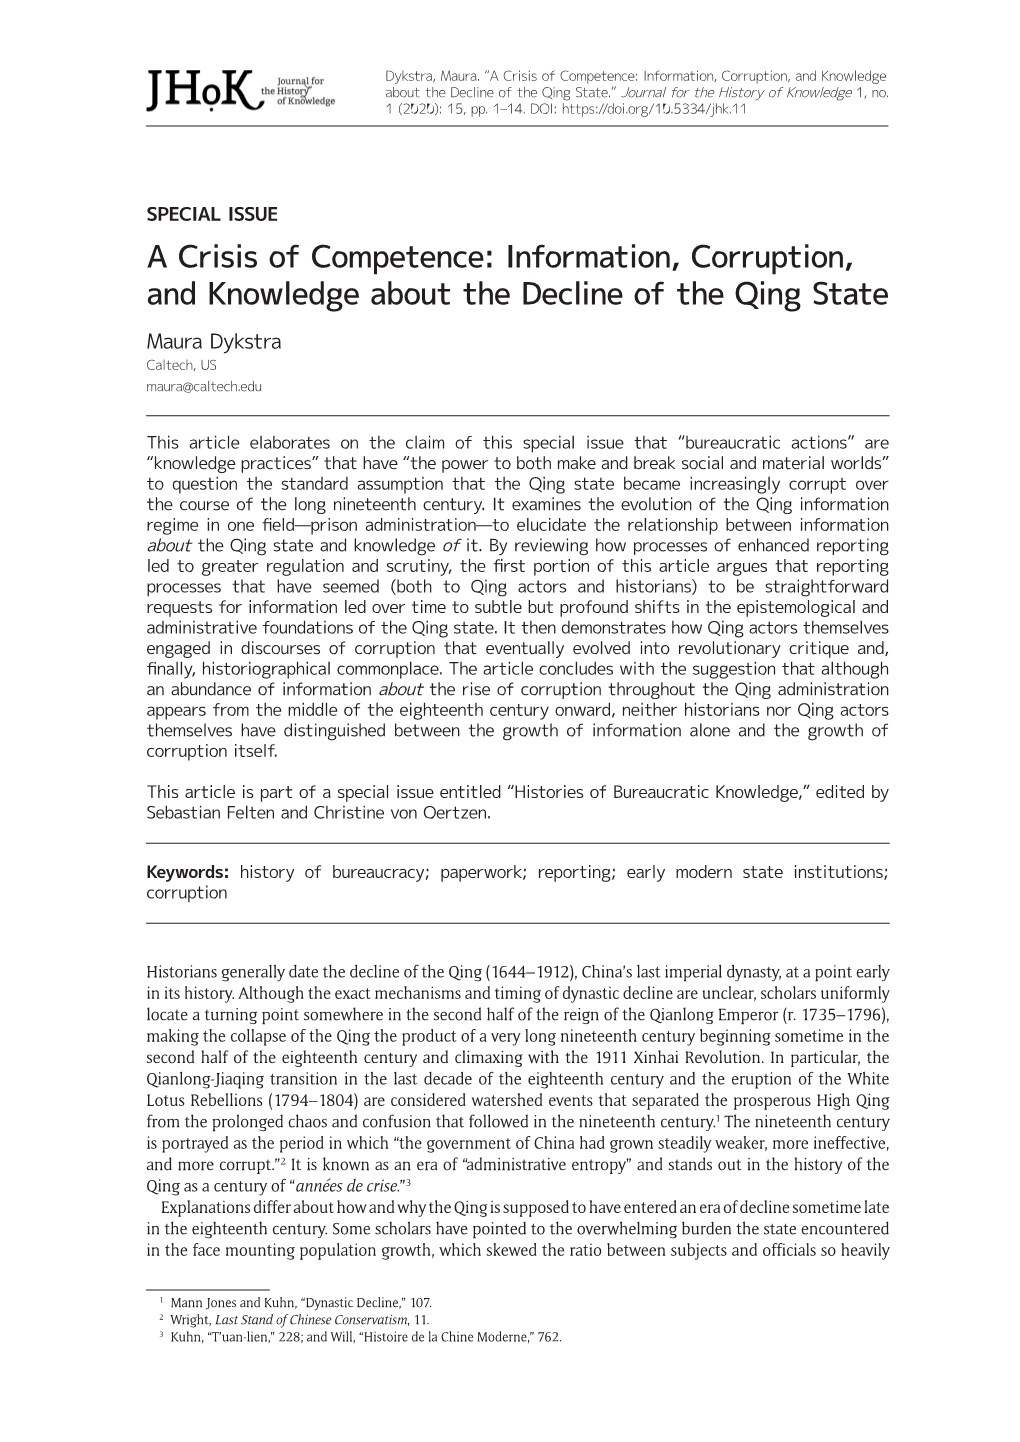 A Crisis of Competence: Information, Corruption, and Knowledge About the Decline of the Qing State.” Journal for the History of Knowledge 1, No